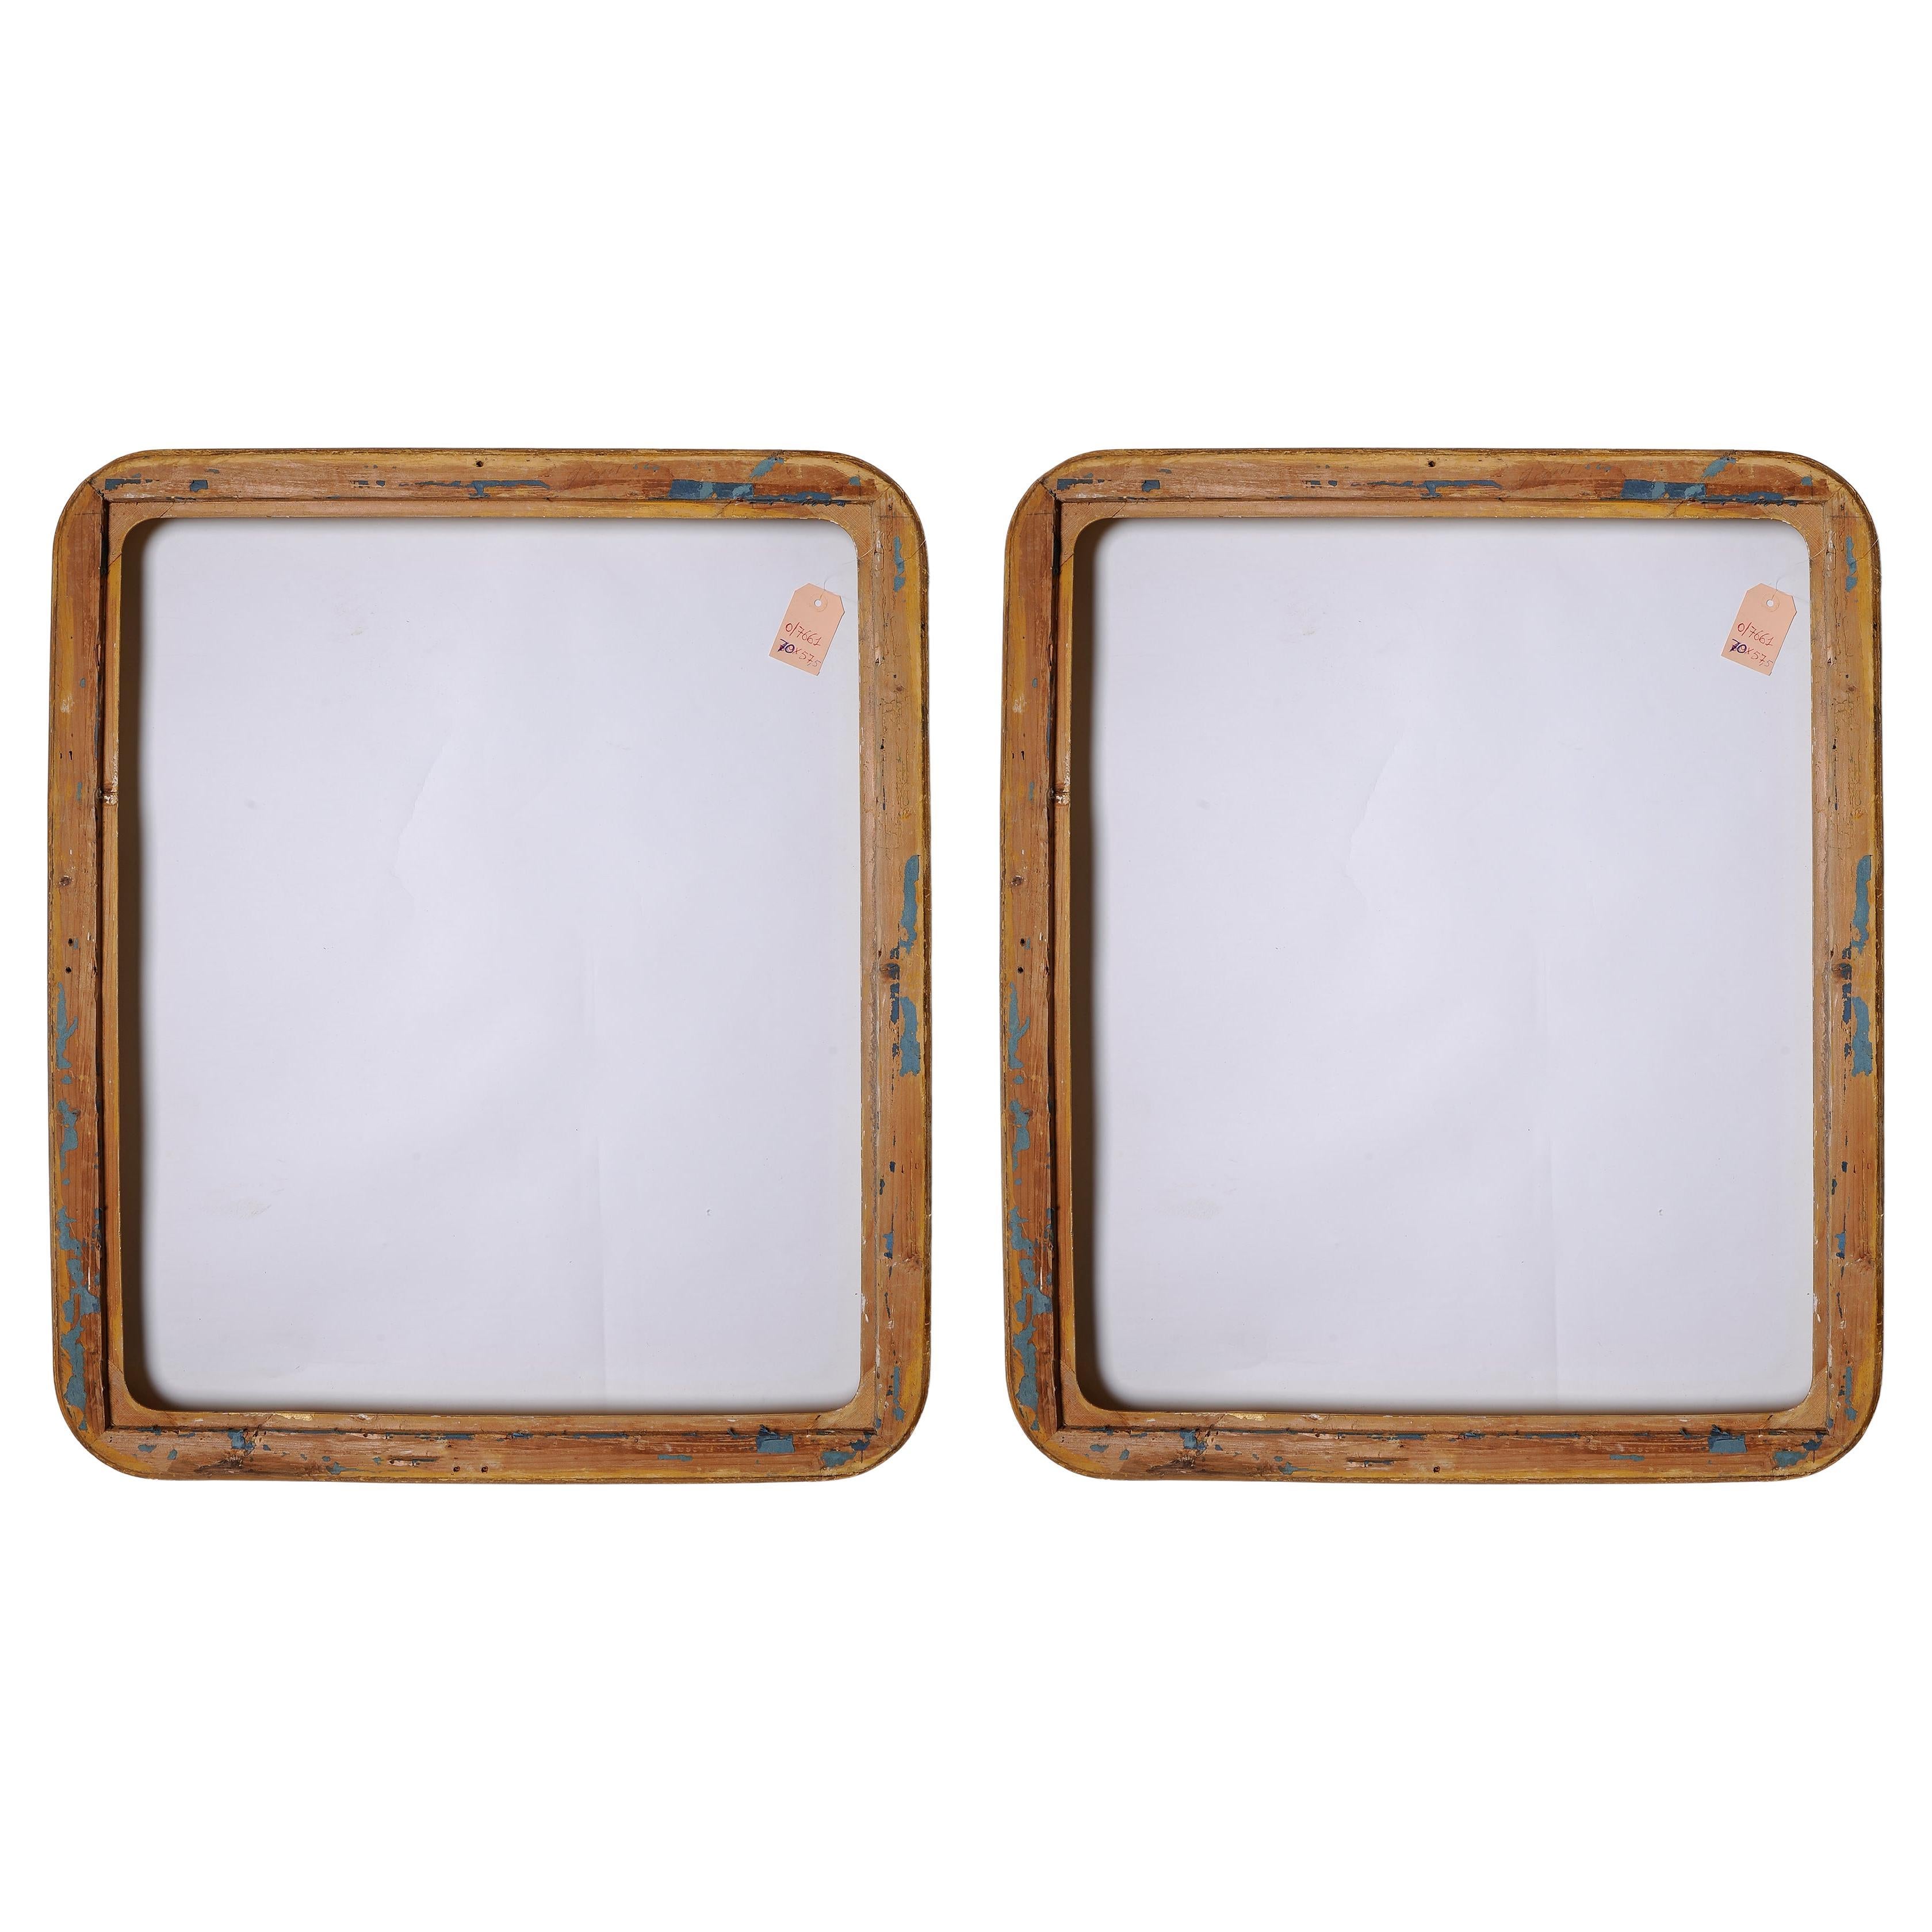 O/7661 - Pair of gilt wooden frames with rounded corners. Perfect for two mirrors, as well as two paintings.
Beautiful also in a modern environment.